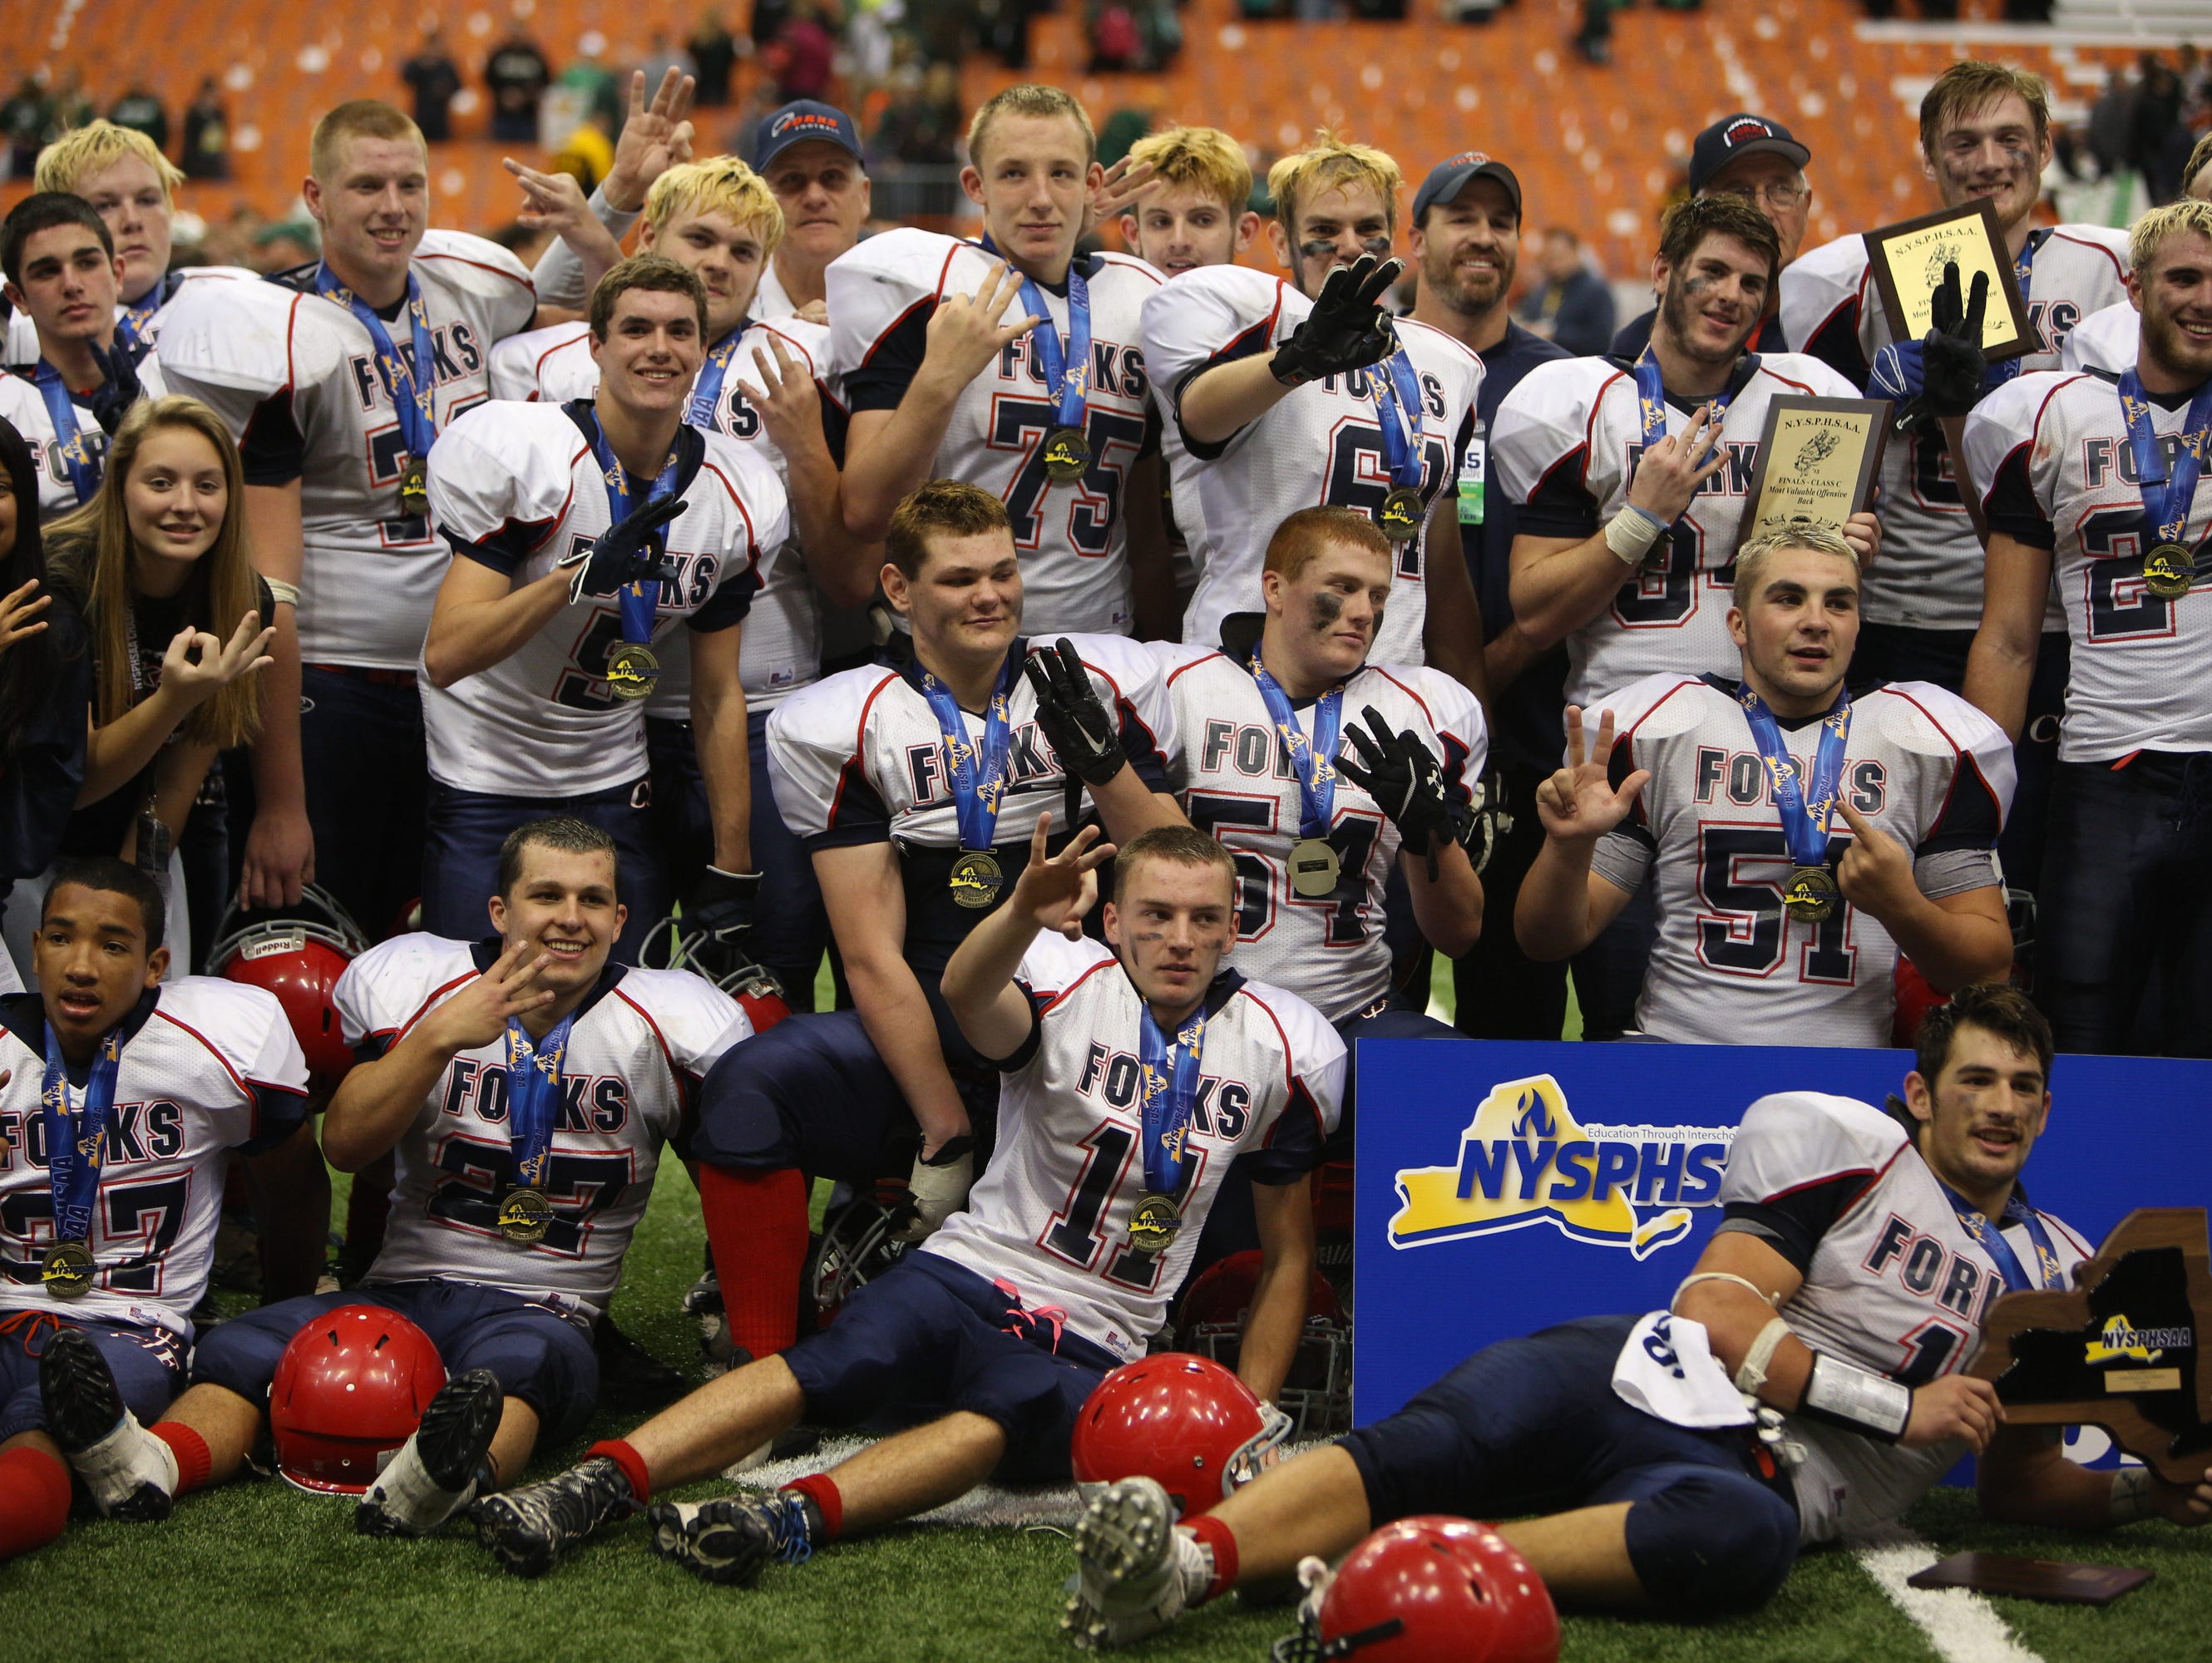 Chenango Forks crushed Greenwich 42-7 inside the Carrier Dome in Syracuse to win their third straight Class C state championship on Friday, Nov. 27, 2015.